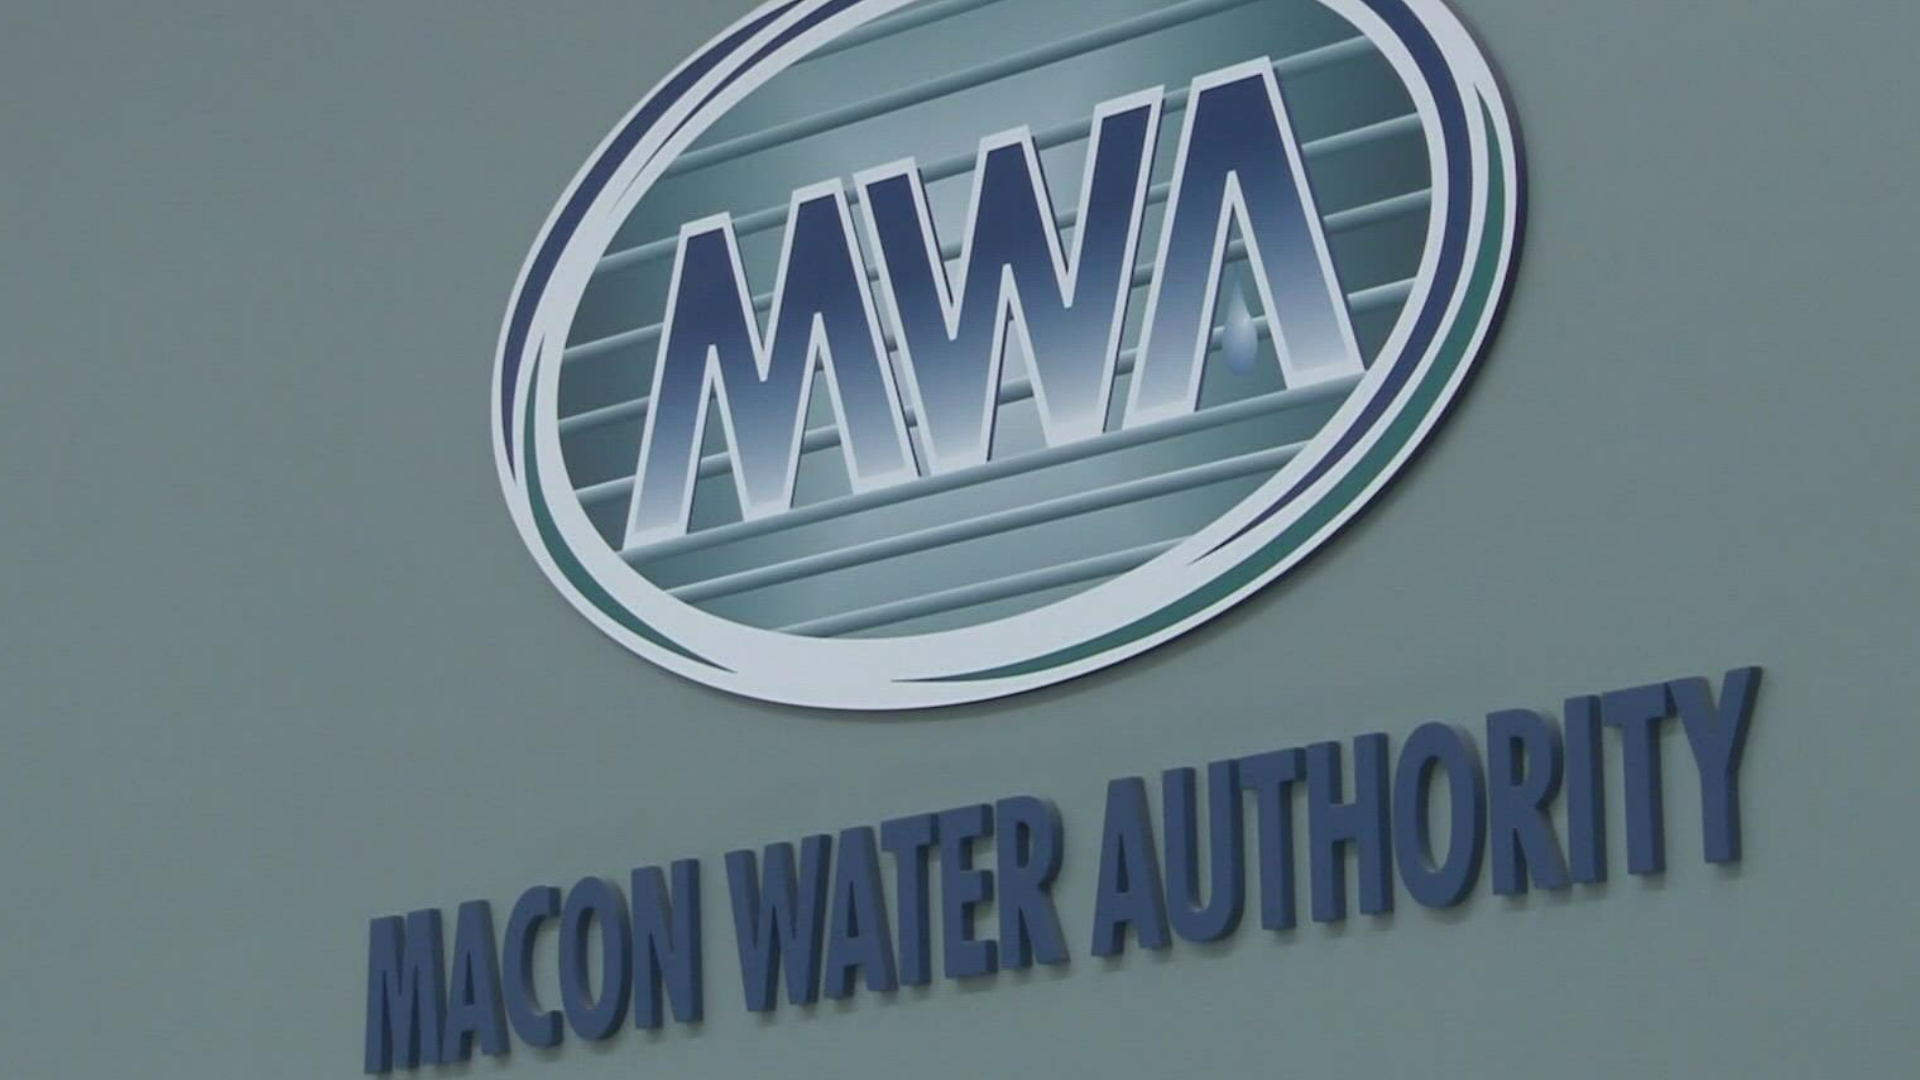 Macon Water Authority members are considering removing Desmond Brown from office for possible ethics violations